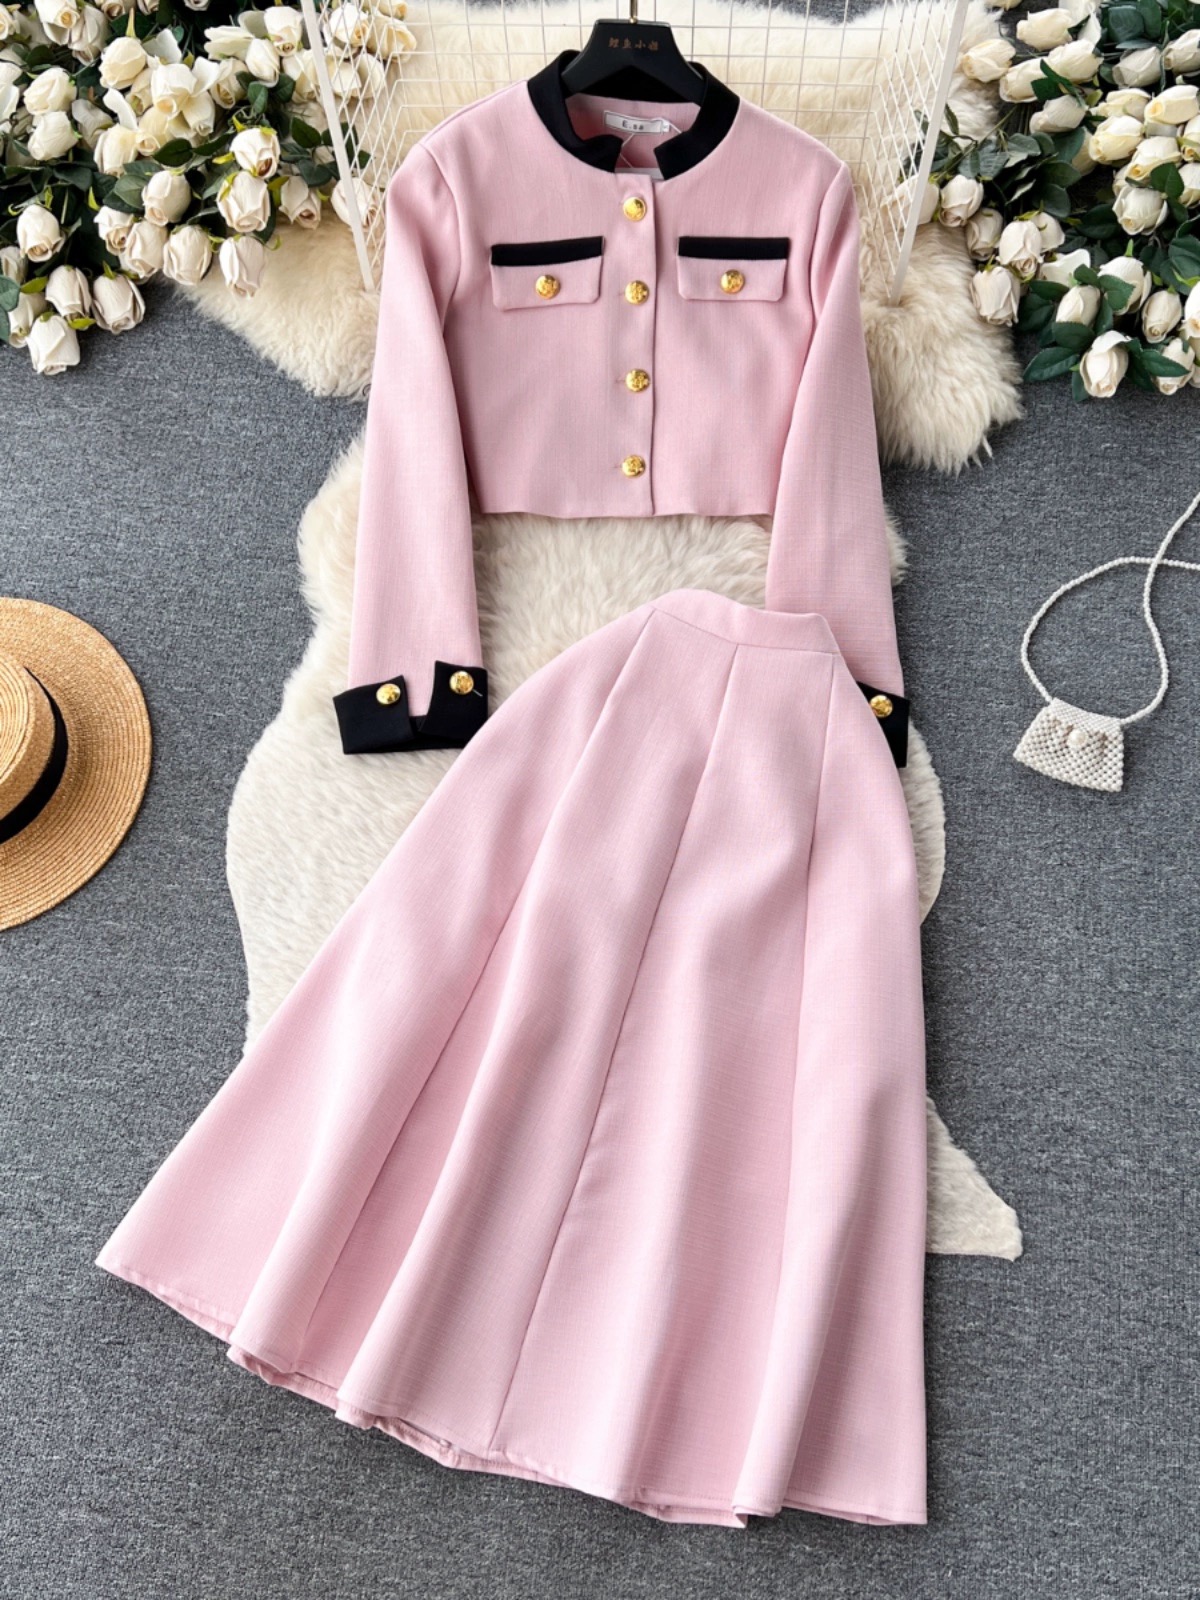 Celebrity, High Sense, Small Fragrance, Metal Breasted Round Neck Suit Jacket, Women's Two-piece, High-waisted Slimming Skirt